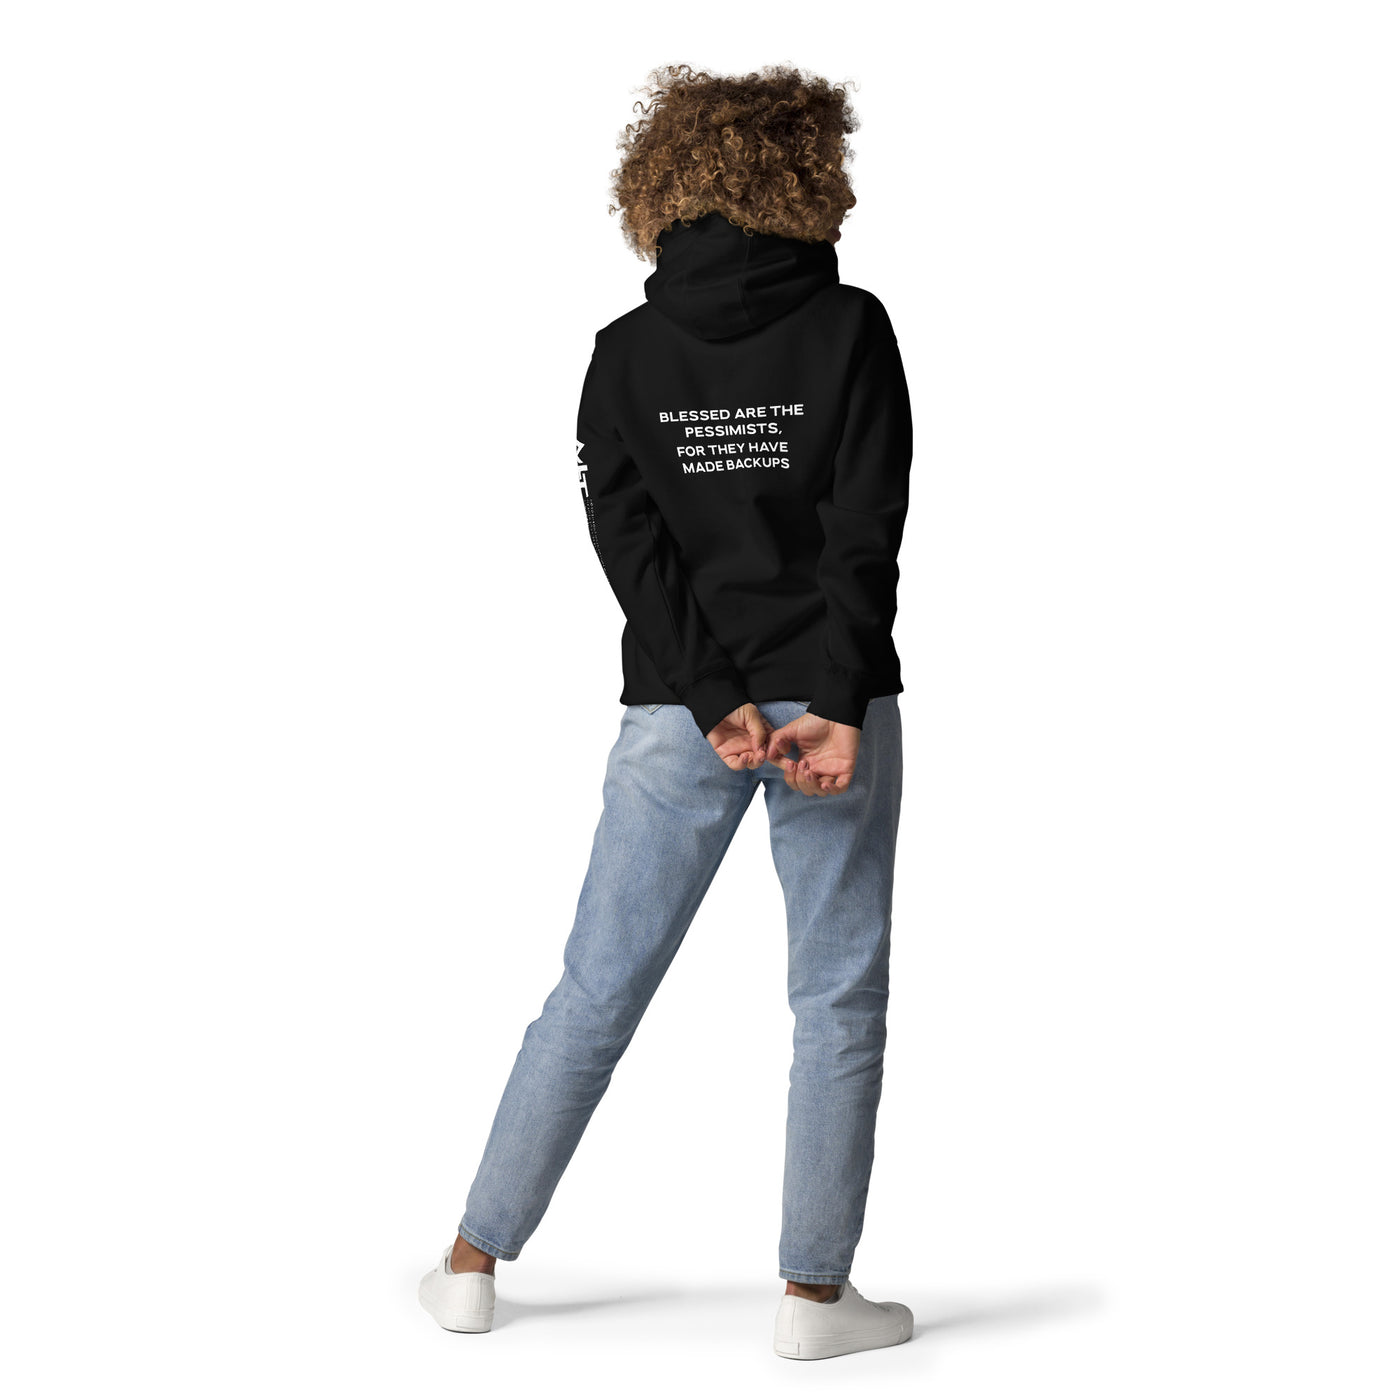 Blessed are the pessimists for they have made backups V2 - Unisex Hoodie ( Black Print )